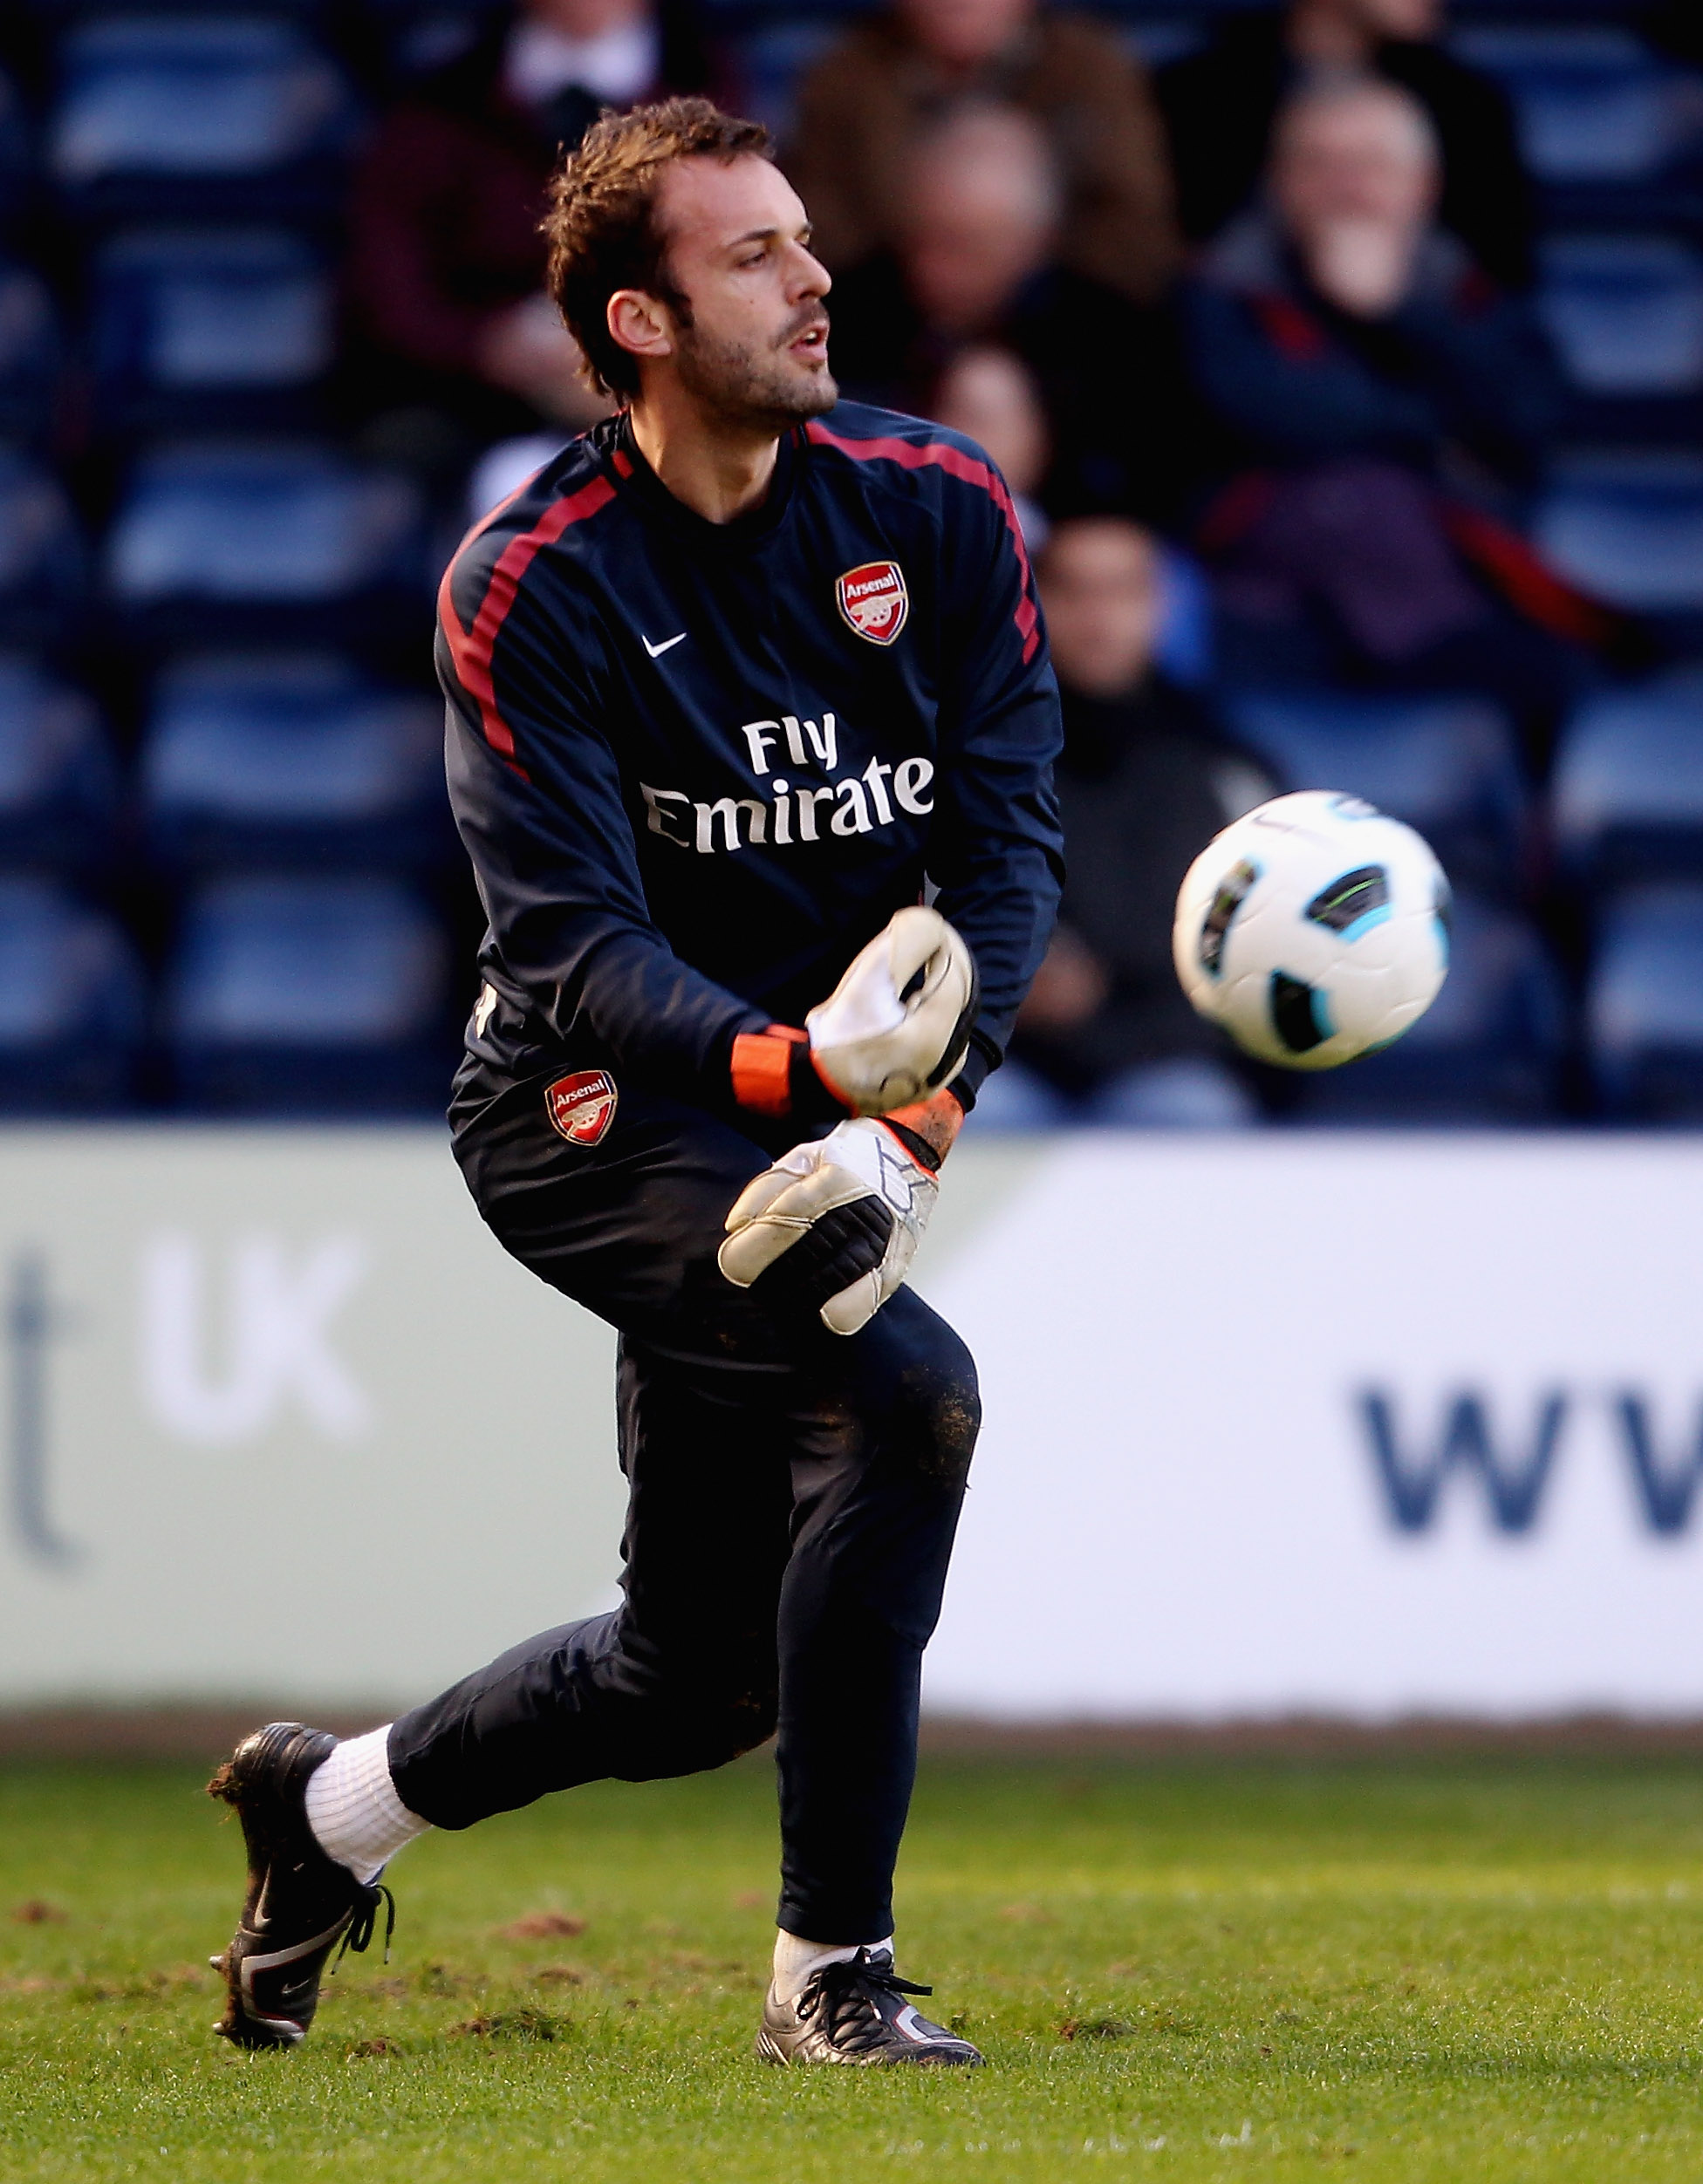 WEST BROMWICH, ENGLAND - MARCH 19:  Manuel Almunia of Arsenal prior to the Barclays Premier League match between West Bromwich Albion and Arsenal at The Hawthorns on March 19, 2011 in West Bromwich, England.  (Photo by Scott Heavey/Getty Images)